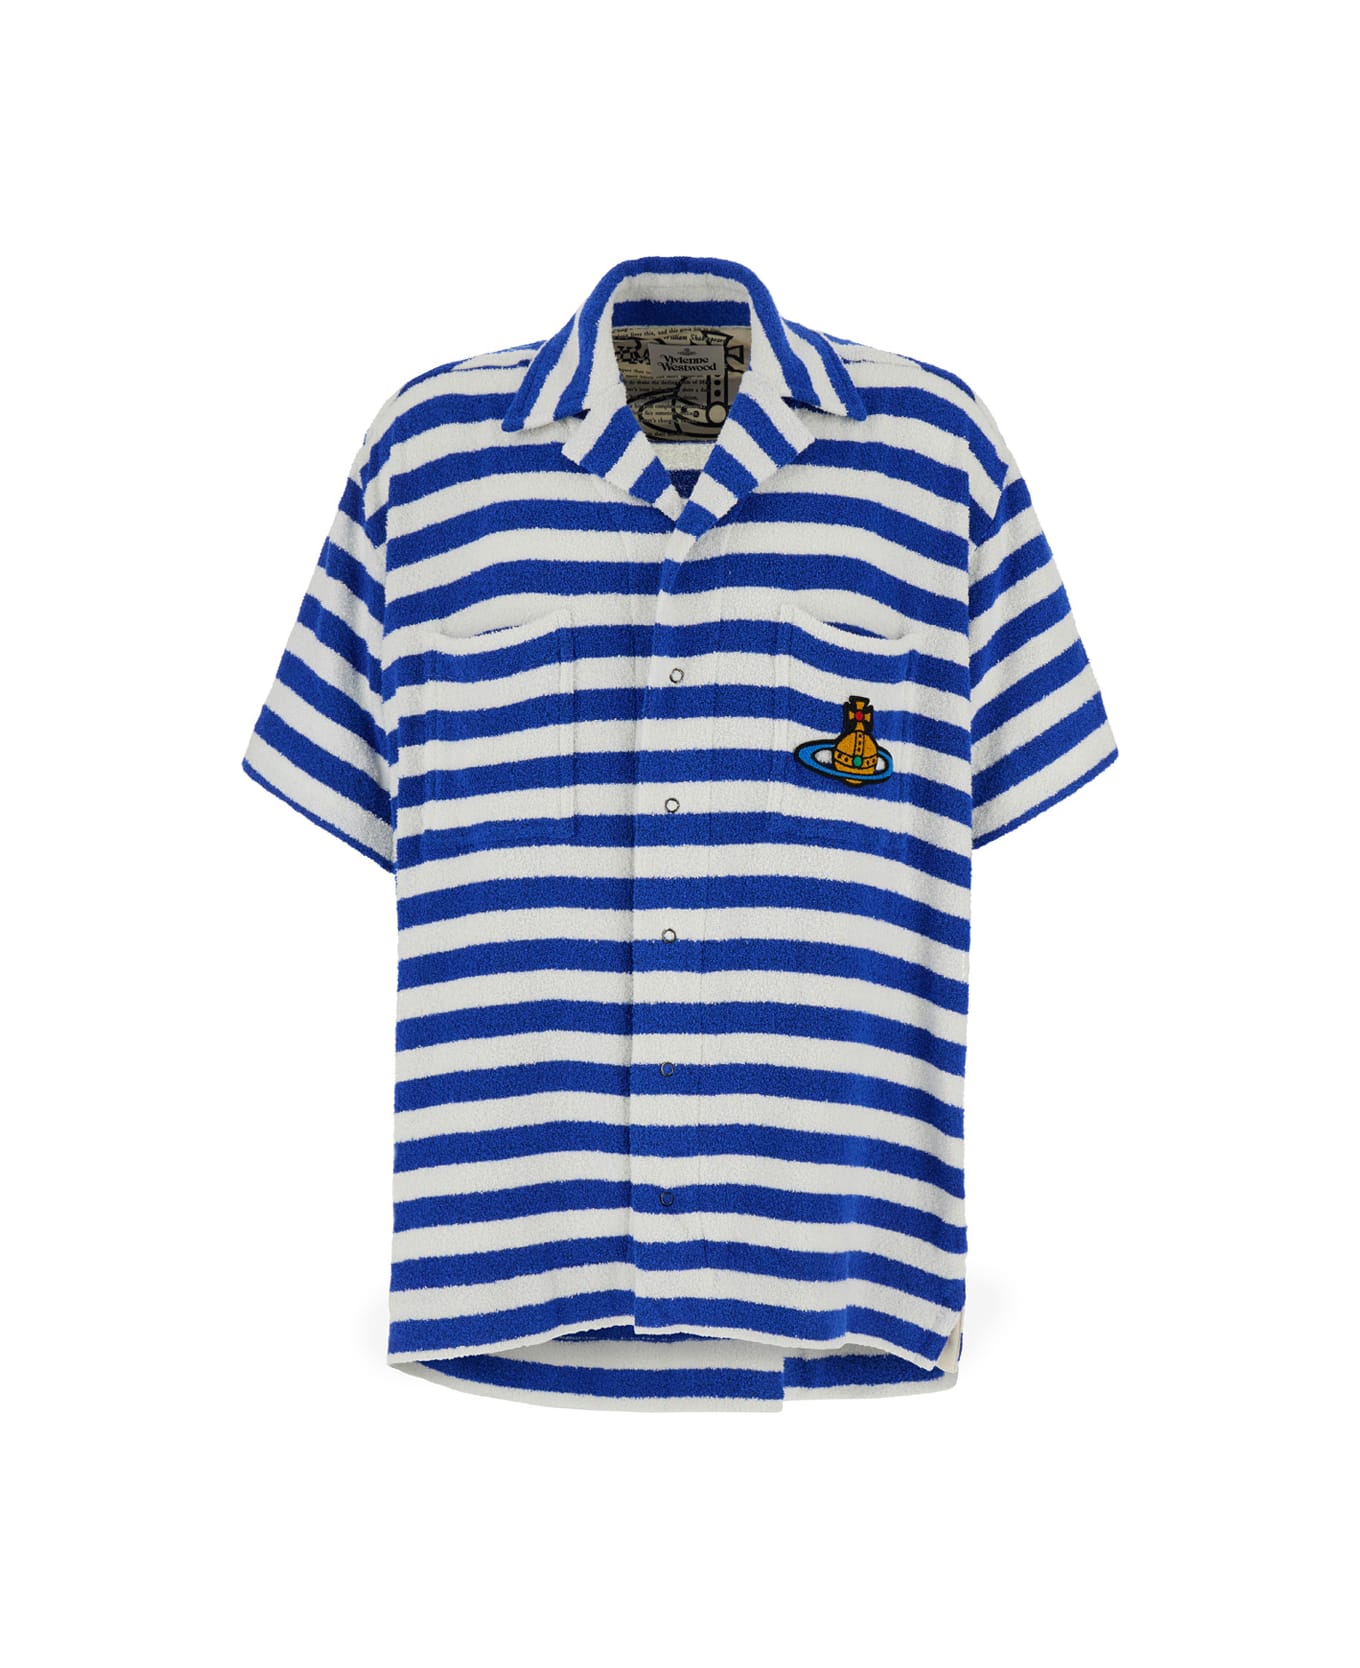 Vivienne Westwood Blue And White Striped Bowling Shirt With Orb Embroidery In Cotton Blend Man - Blu シャツ